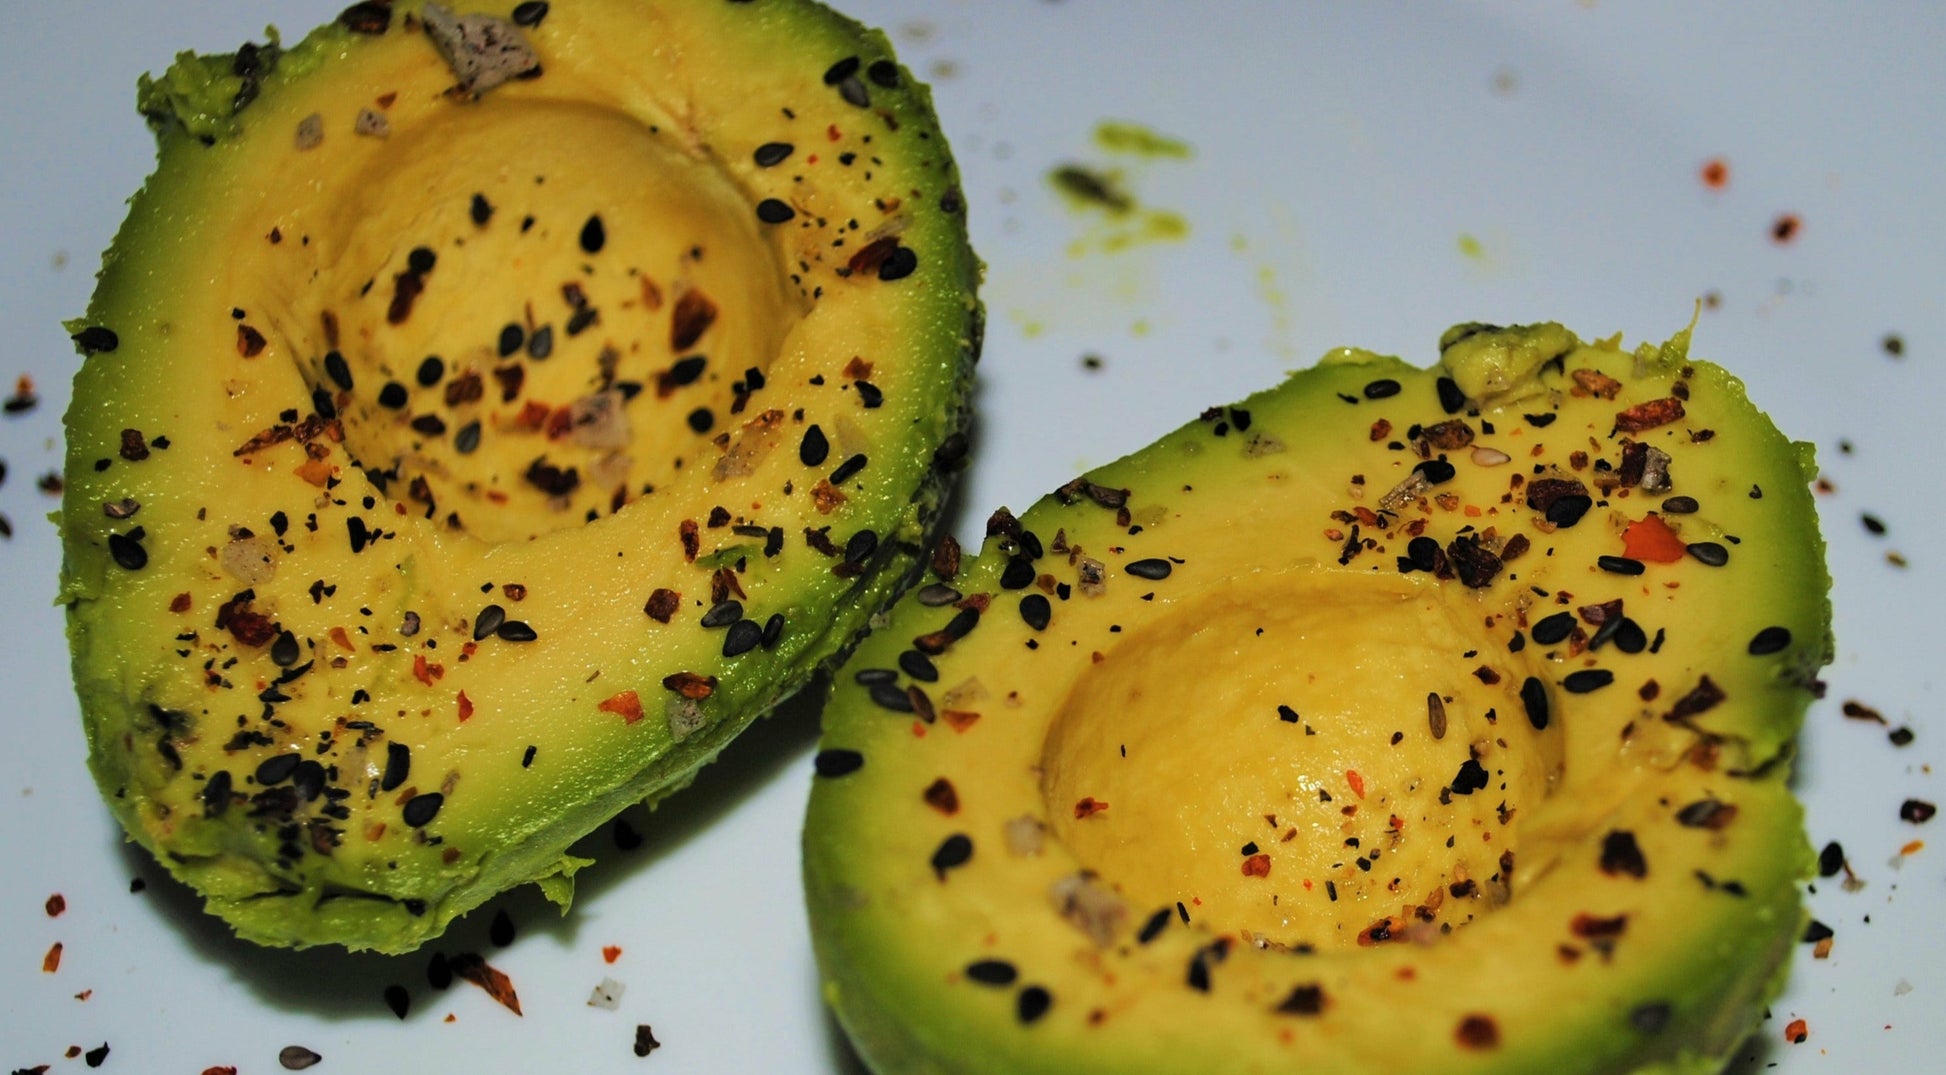  Just Spices Avocado Topping, 2.11 OZ I Spice mix for avocado I  Also for refining bowls and salad I With black sesame, tomato and chilli,  pyramid salt and more 